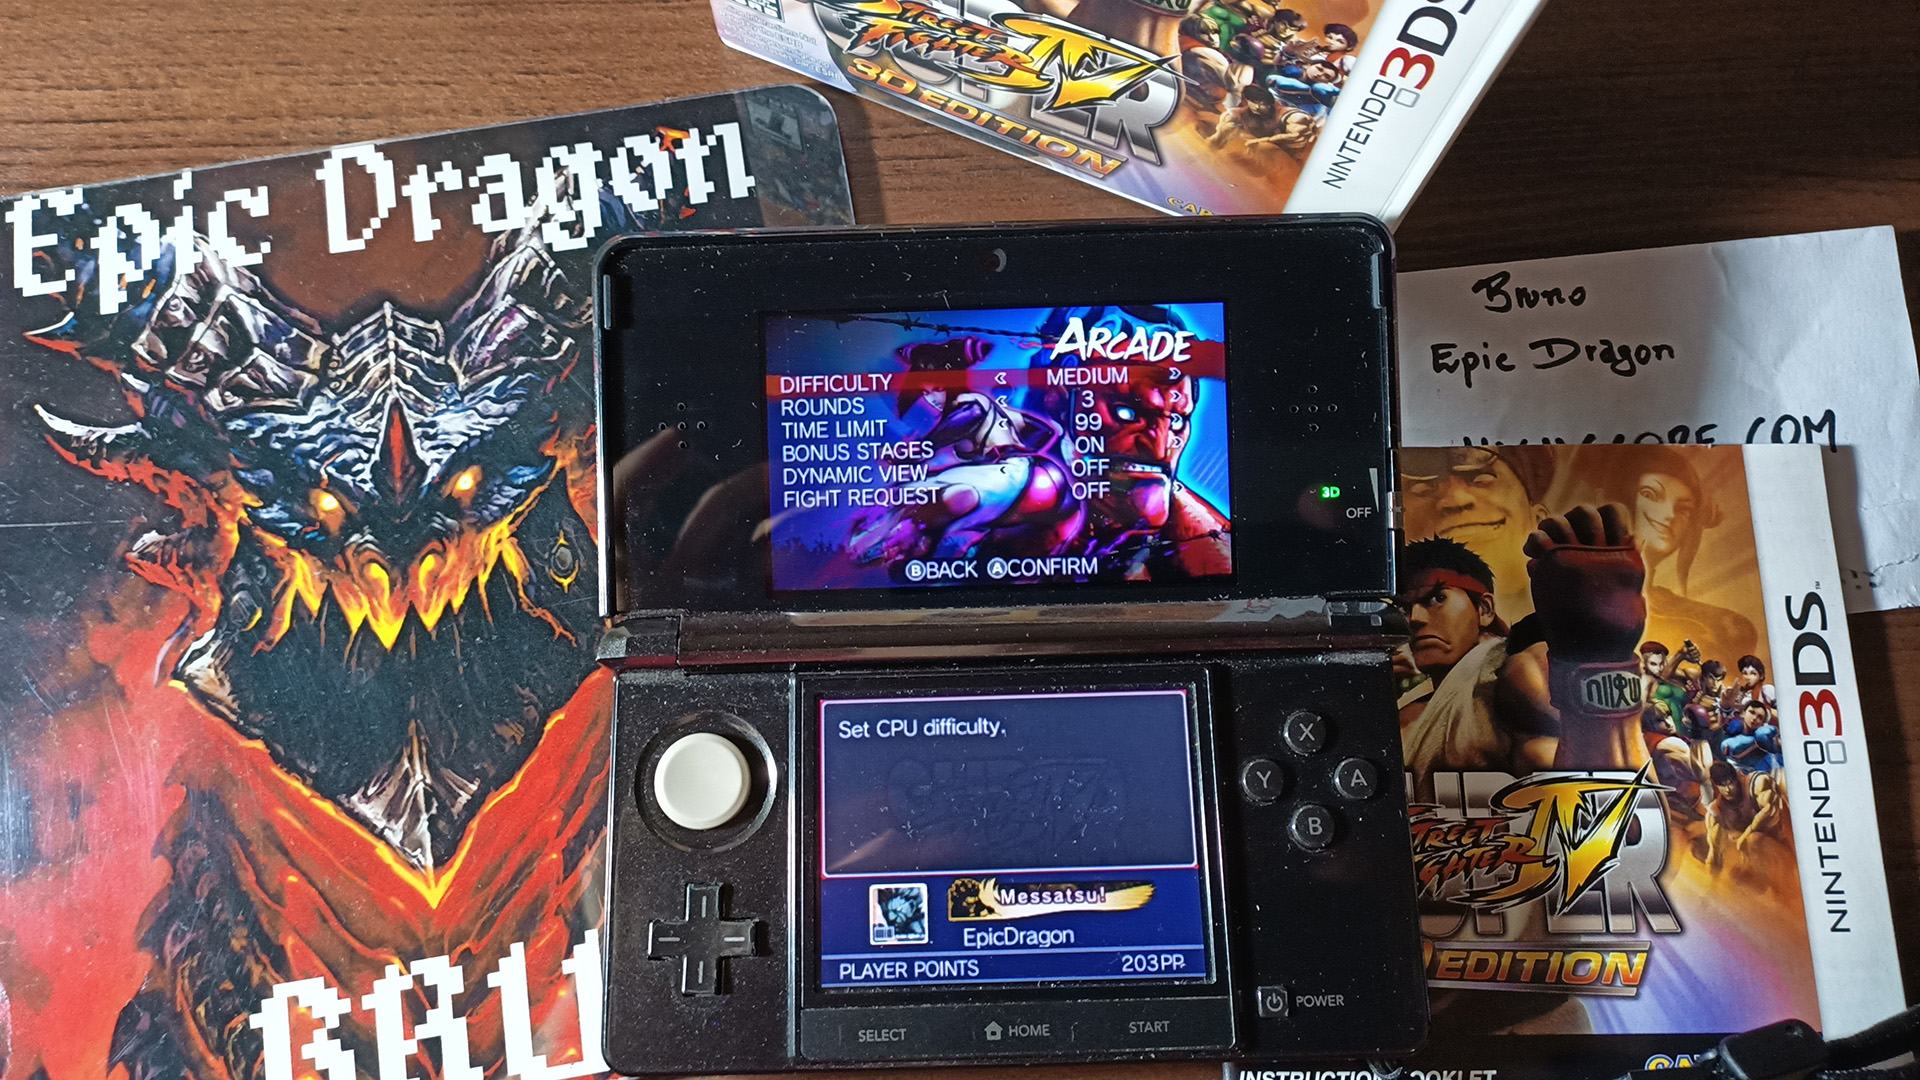 EpicDragon: Super Street Fighter IV 3D Edition: Arcade: Rose (Nintendo 3DS) 735,400 points on 2022-08-11 17:37:33